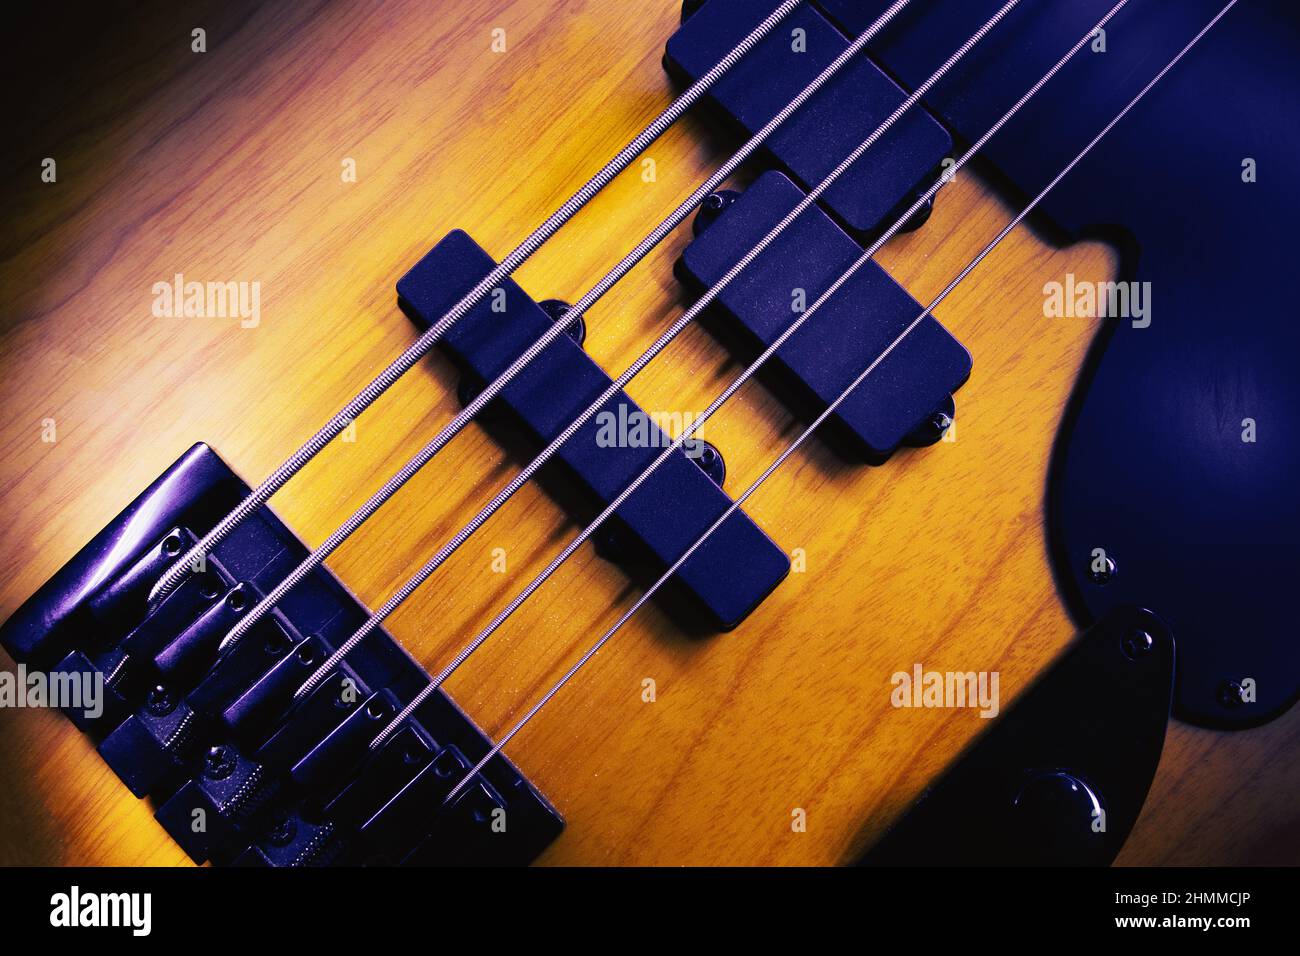 Closeup view of bridge and pickups of five strings bass guitar, highlighted shapes. Stock Photo